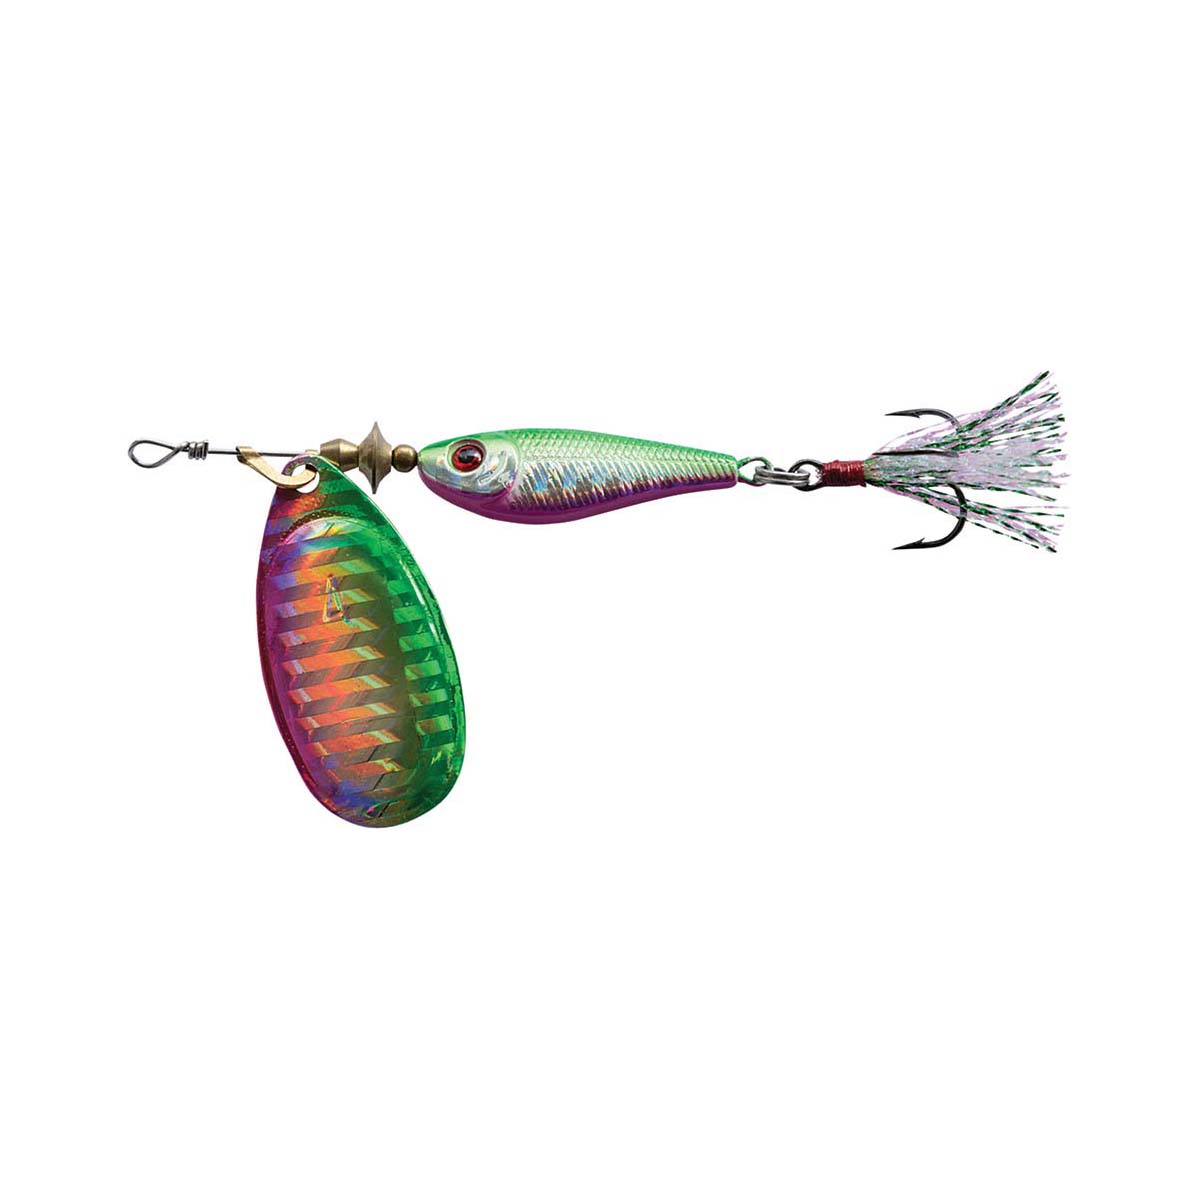 Black Magic Spinmax Spinner Lure 6.5g Fruity